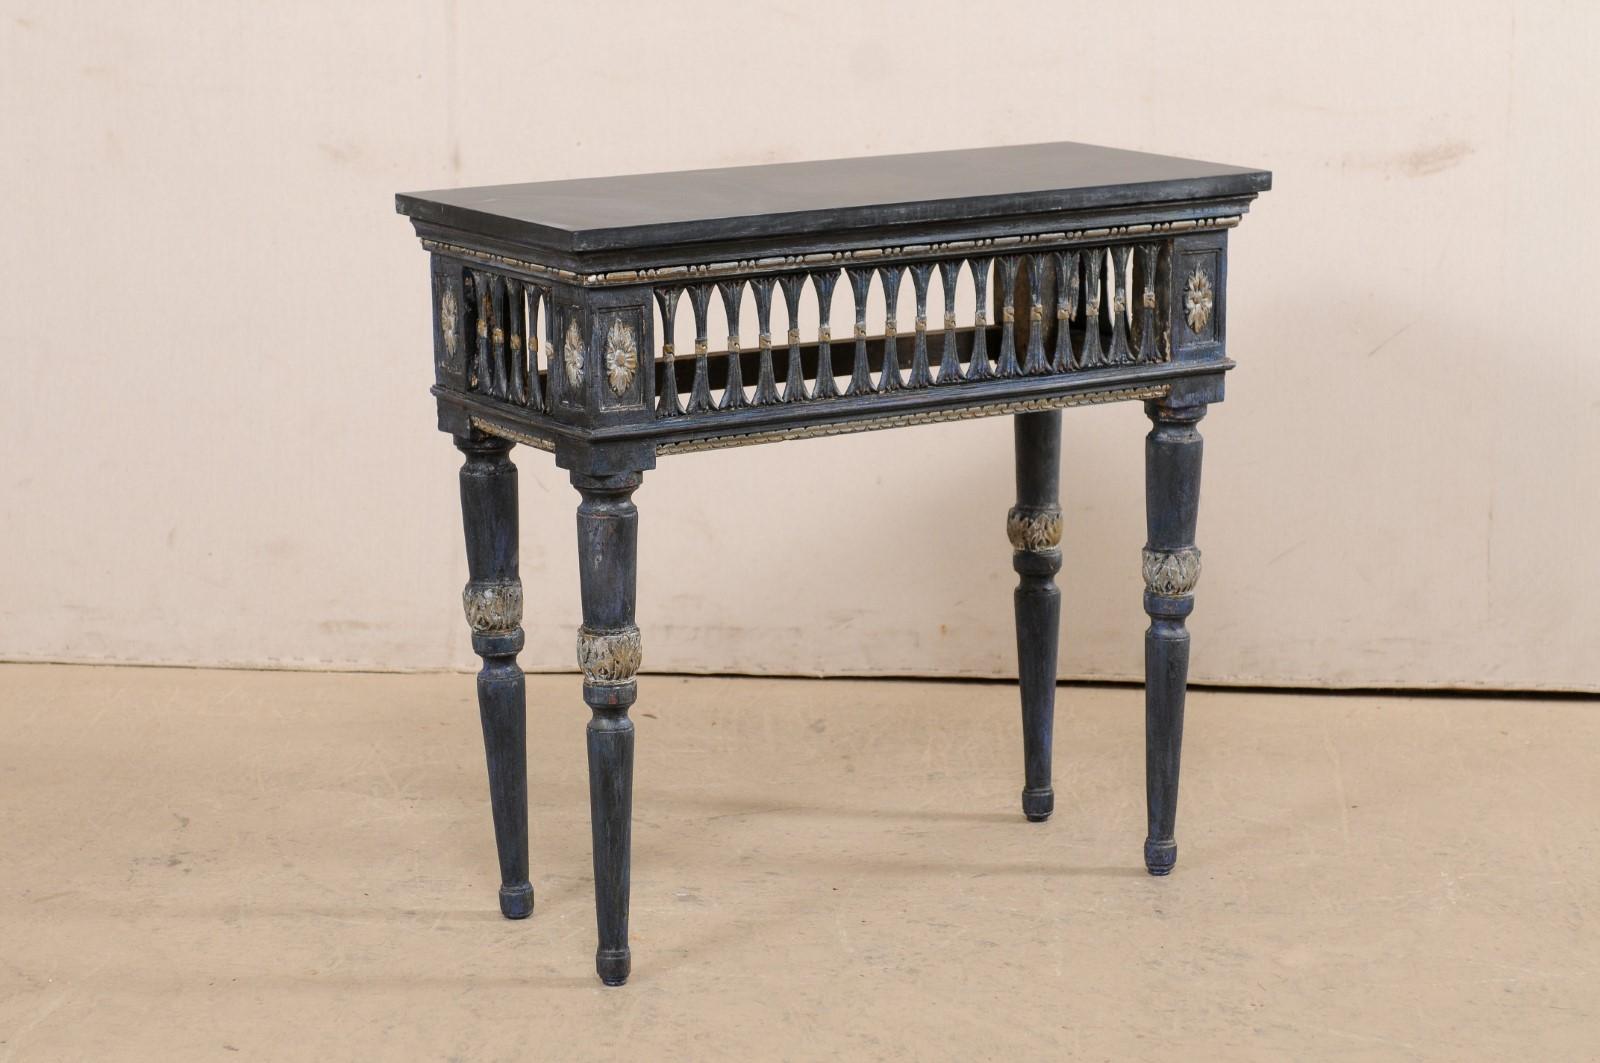 A beautiful Italian console table with pierced skirt and slate stone top from the early 19th century. This antique table from Italy is topped with a rectangular-shaped honed black slate slab, which rests above a fabulously pierce-carved apron, along